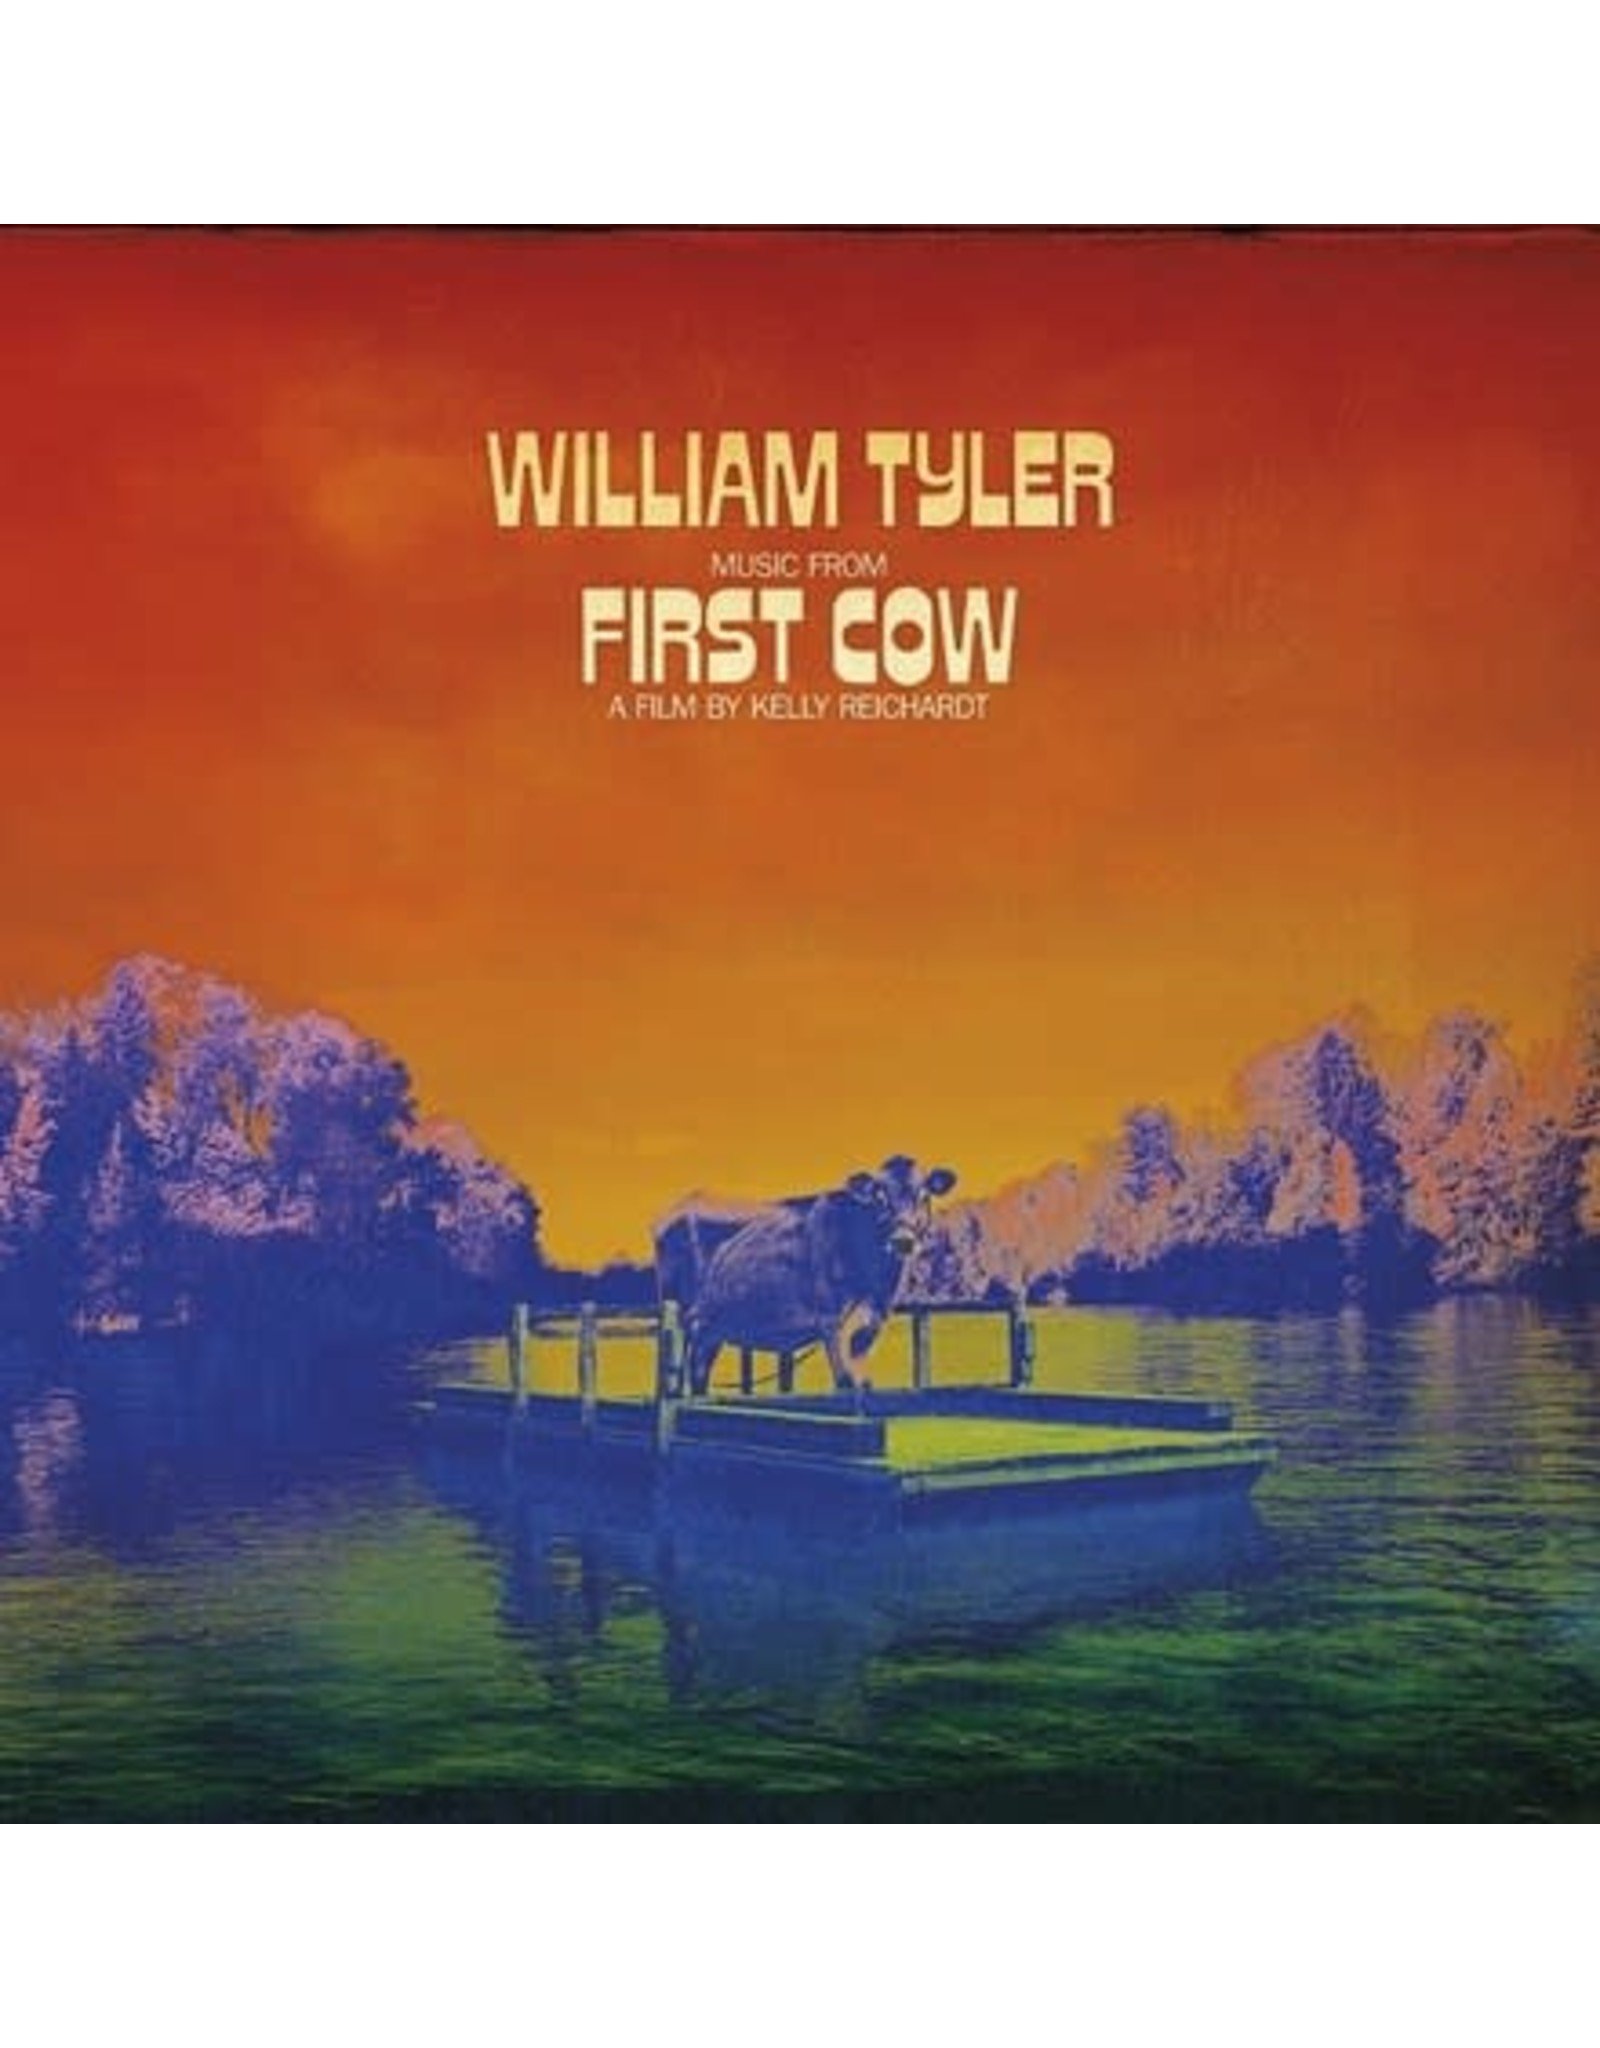 Merge Tyler, William: Music From First Cow LP